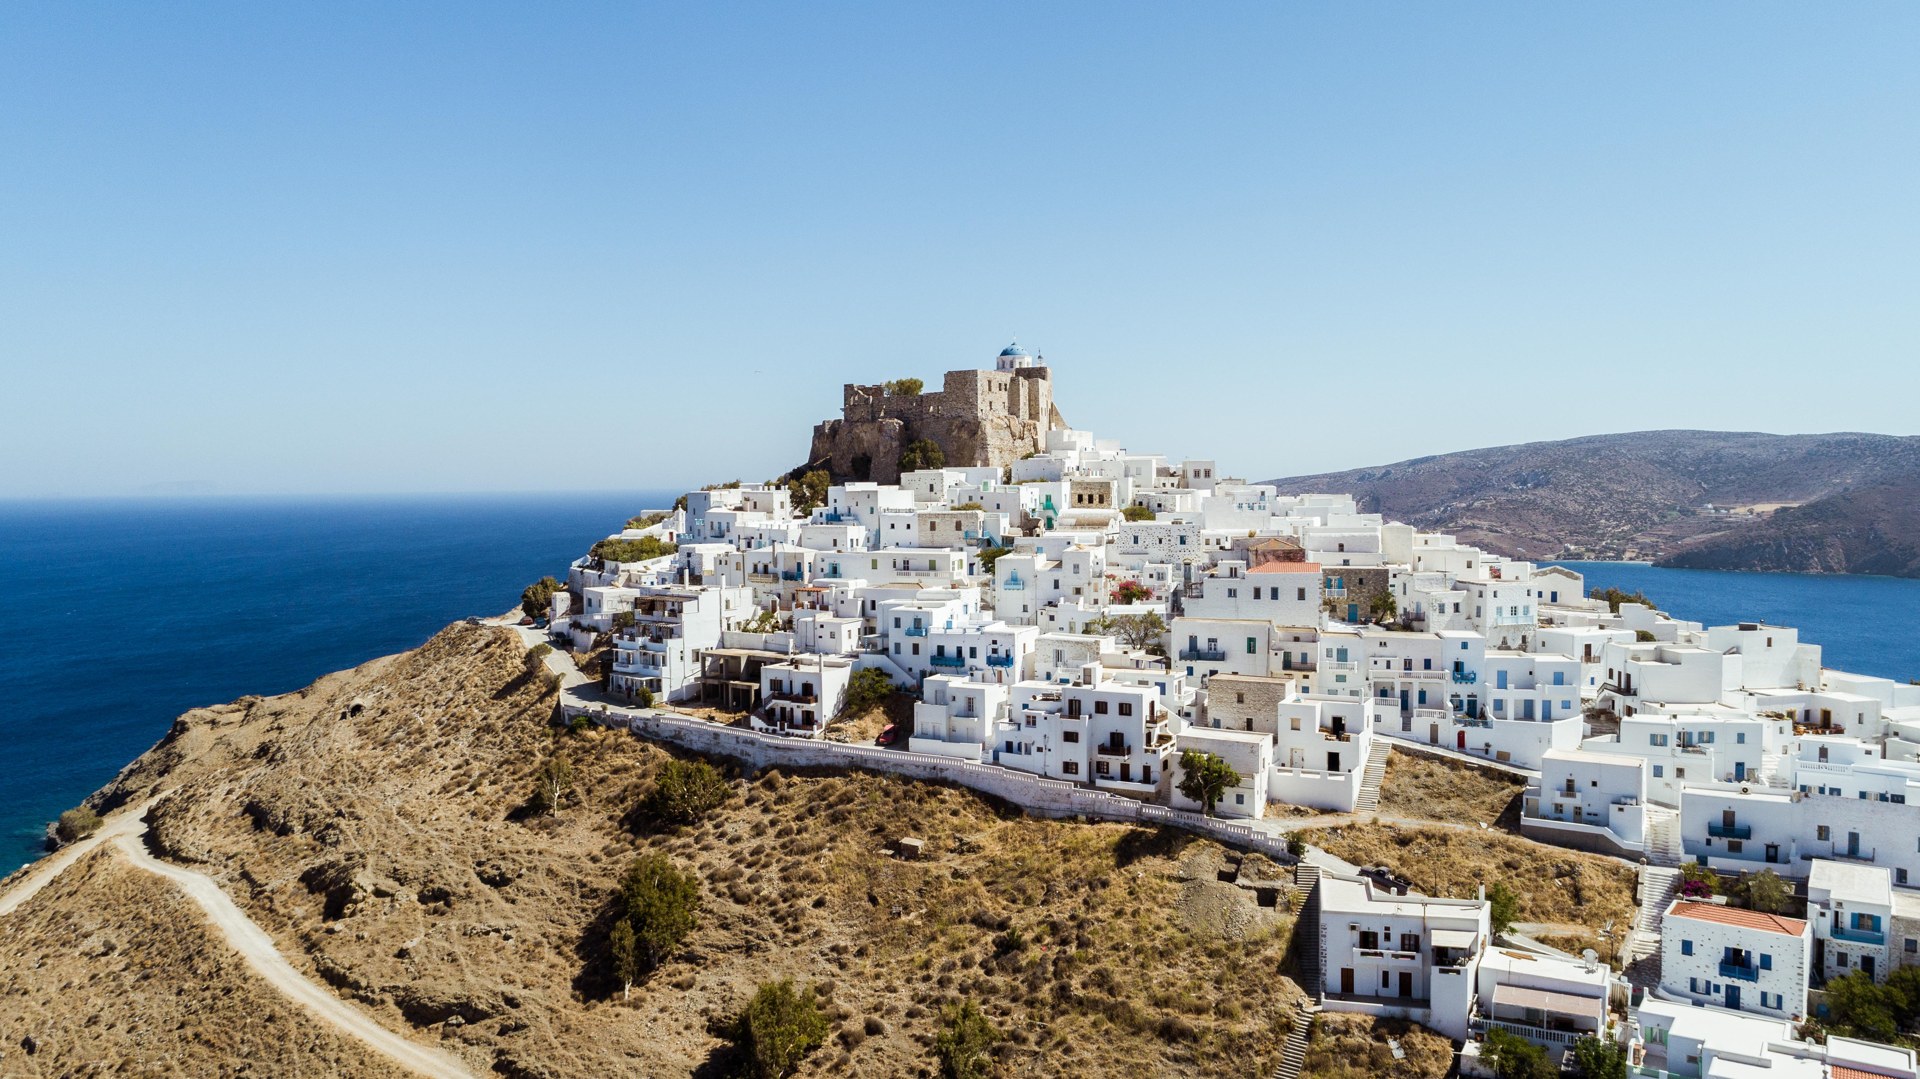 The main town of Astypalea emits classic Cycladic charm everywhere you look